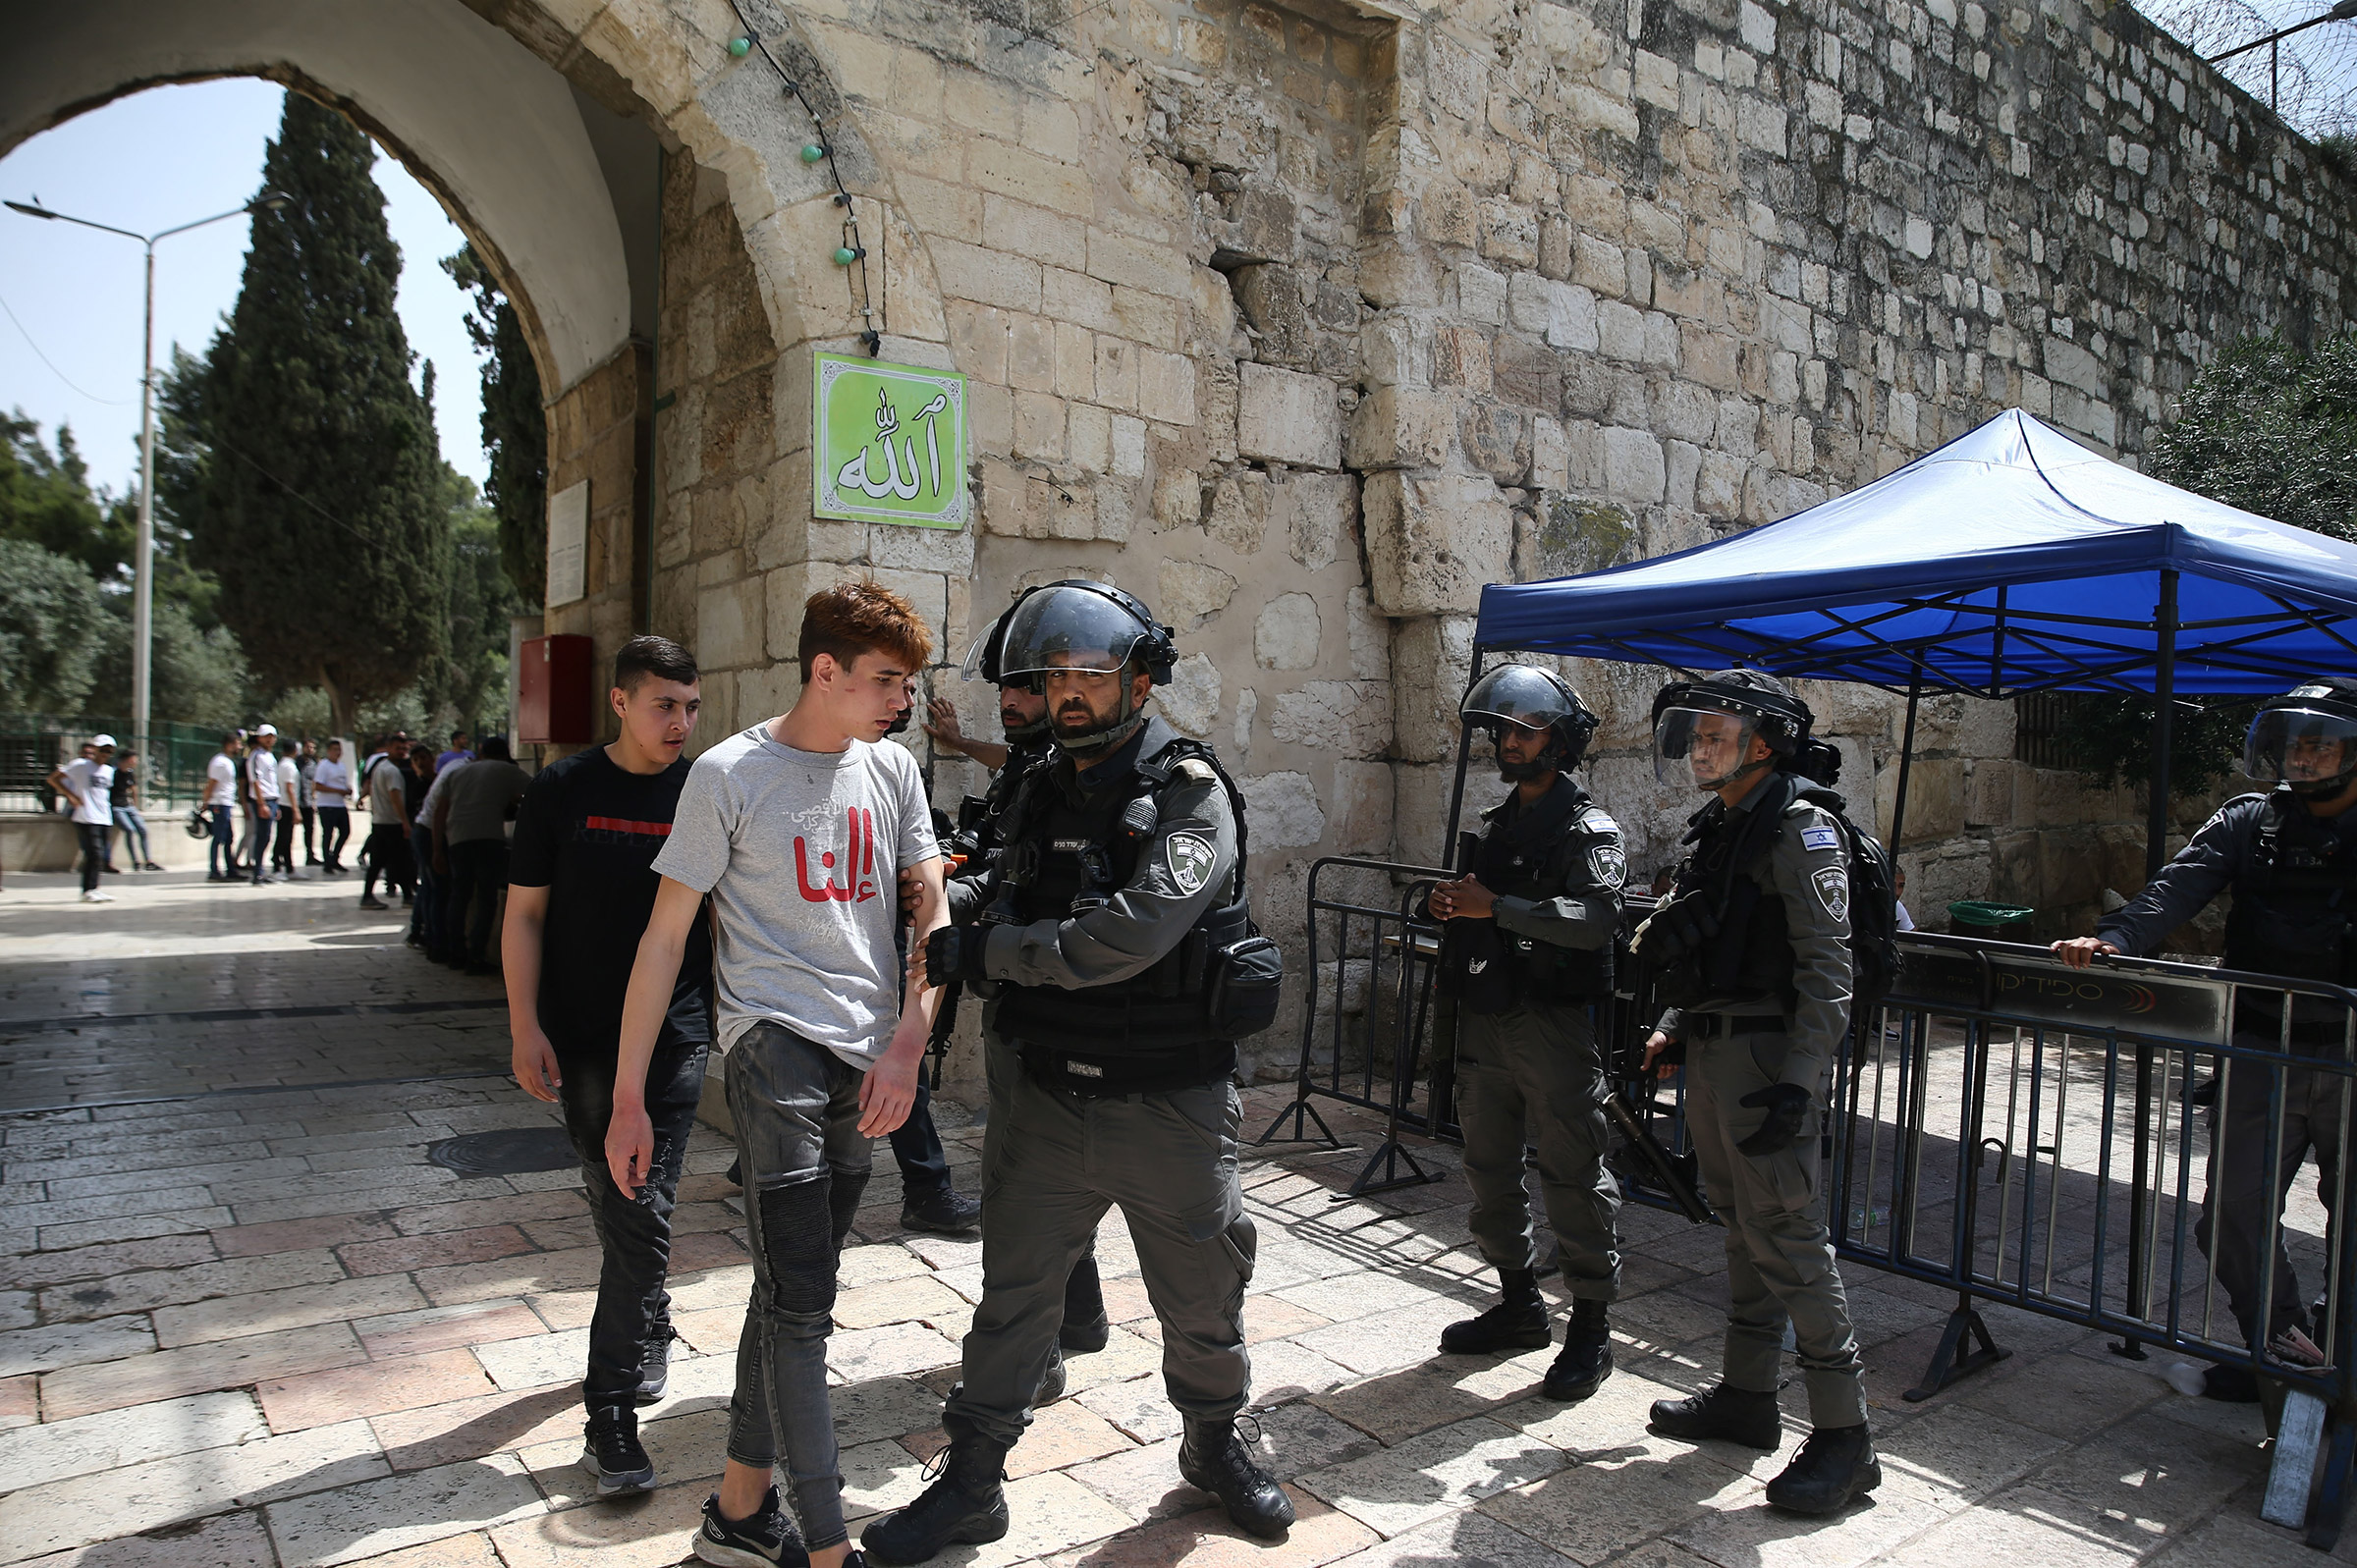 Israeli police detain some Palestinians during their intervention at the Al-Aqsa Mosque in East Jerusalem on May 21, 2021. (Mostafa Alkharouf—Anadolu Agency/Getty Images)